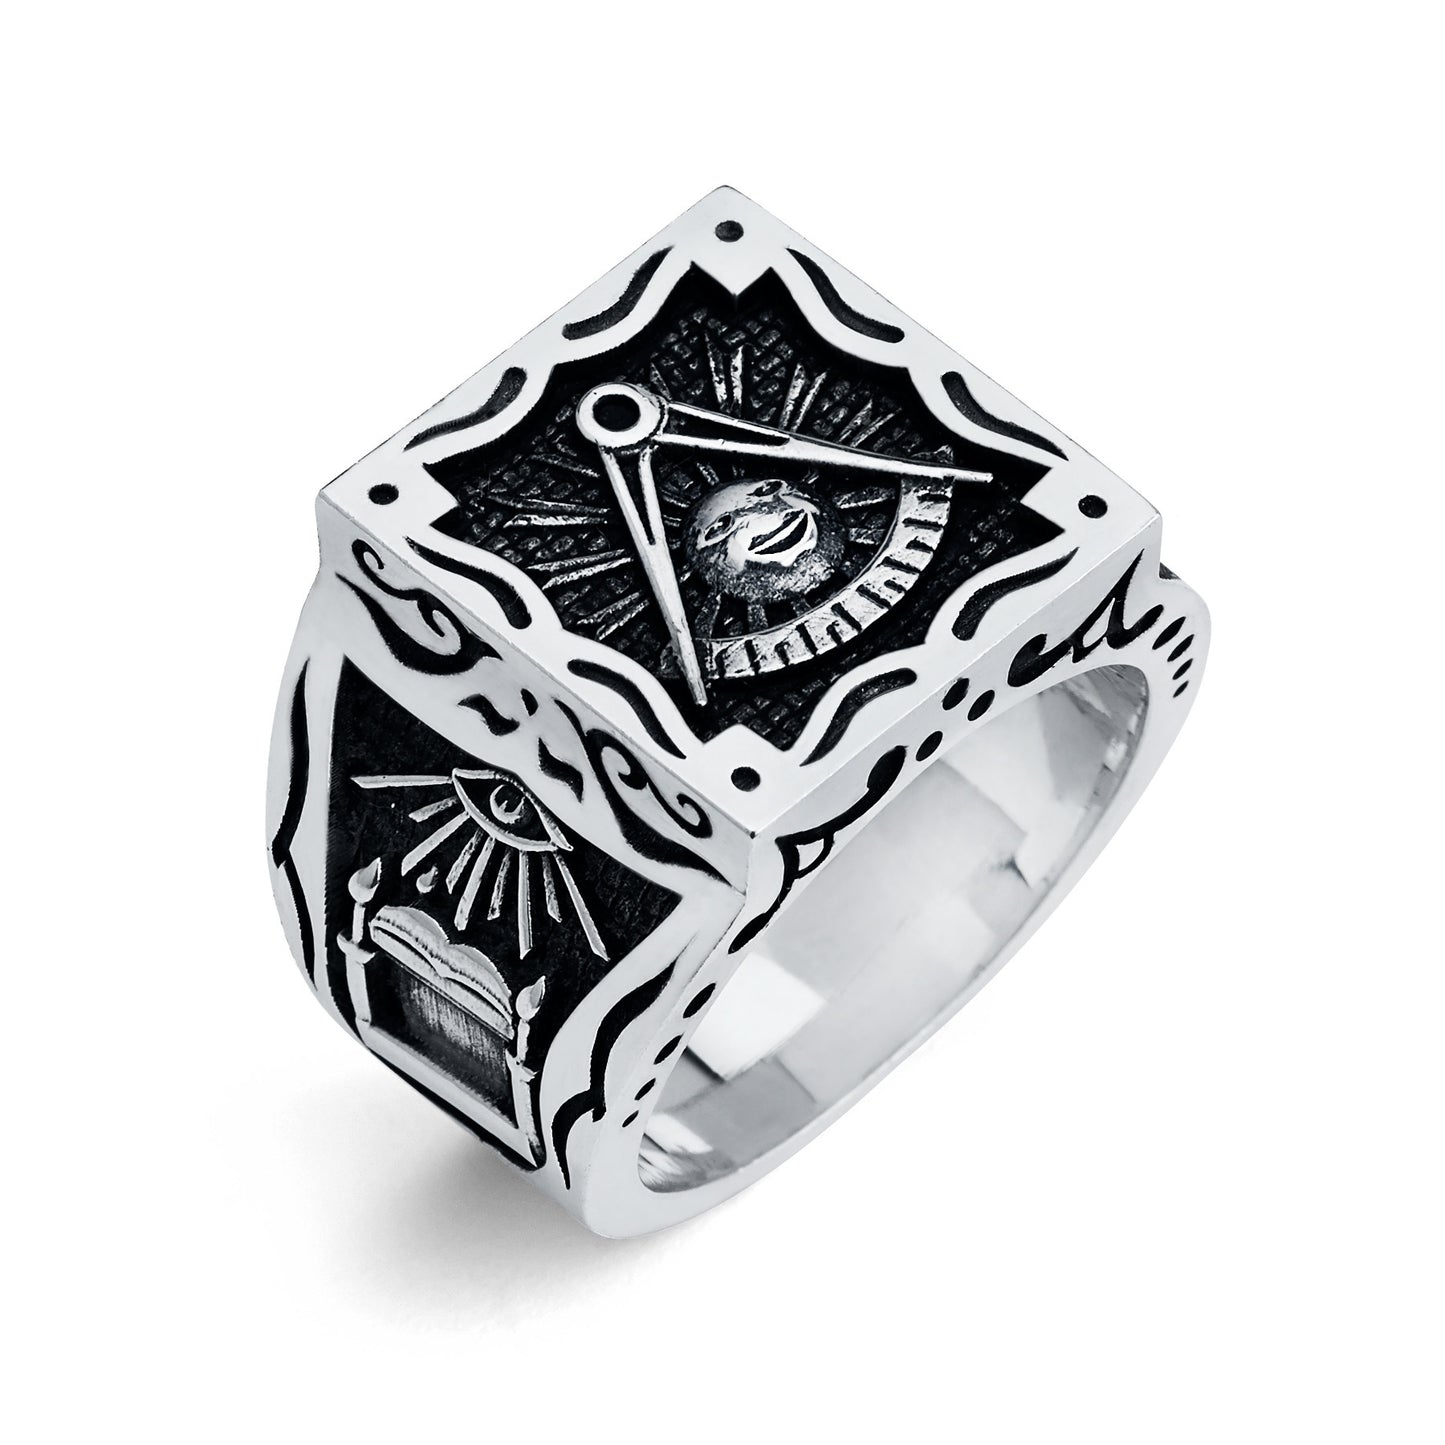 Past Master Ring, Gothic Square Ring